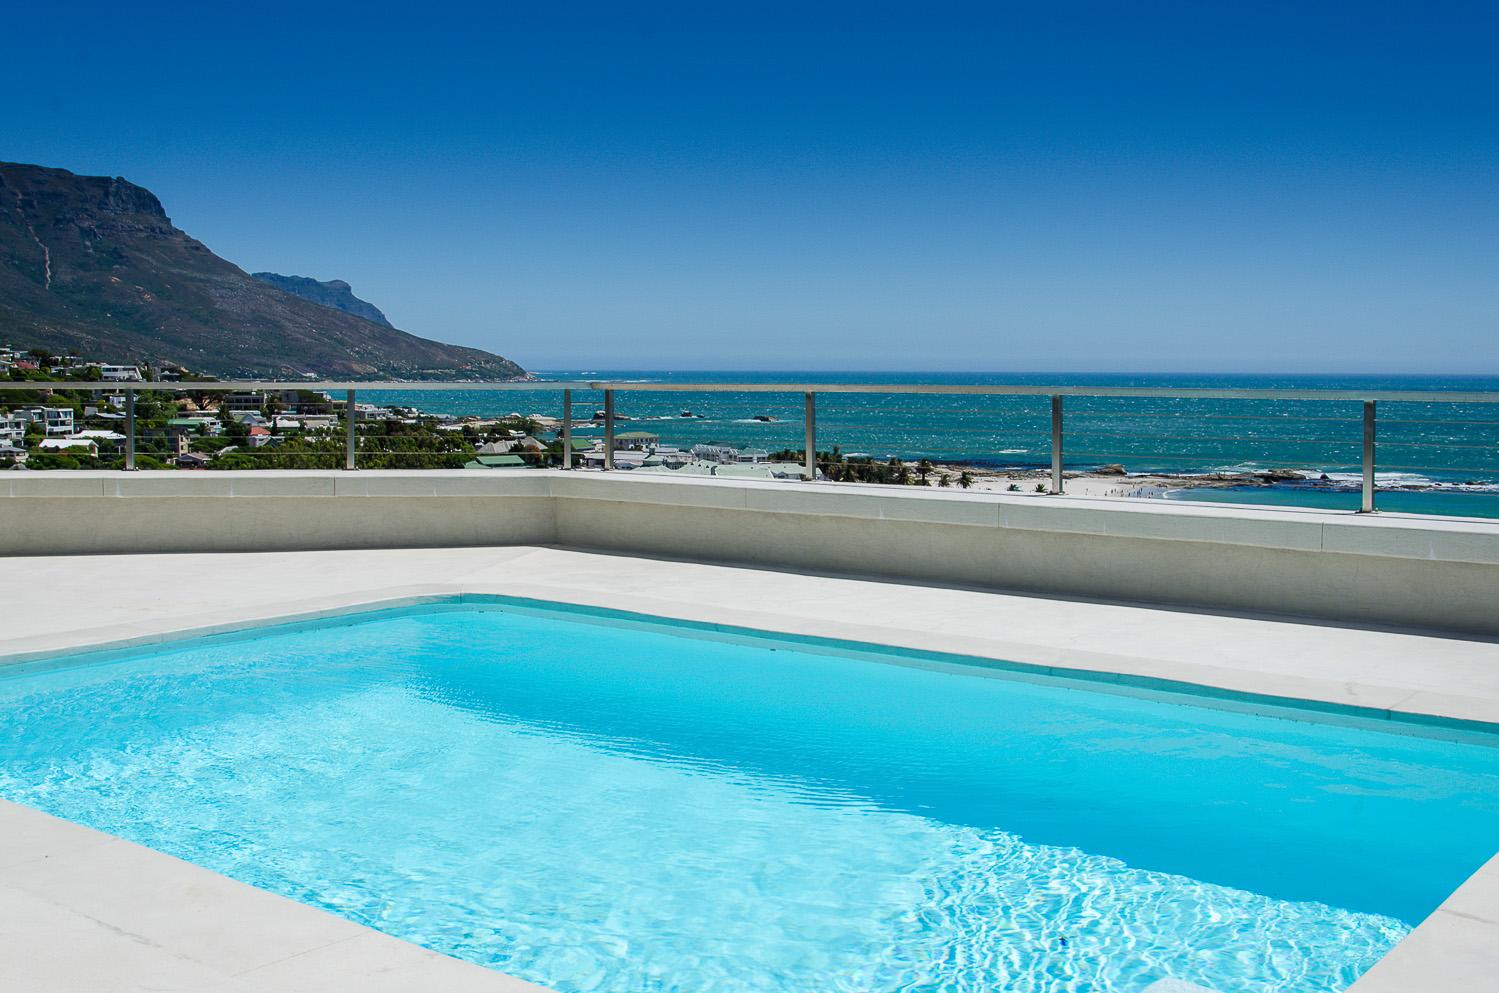 Photo 13 of Strathmore Dream accommodation in Camps Bay, Cape Town with 4 bedrooms and 3 bathrooms